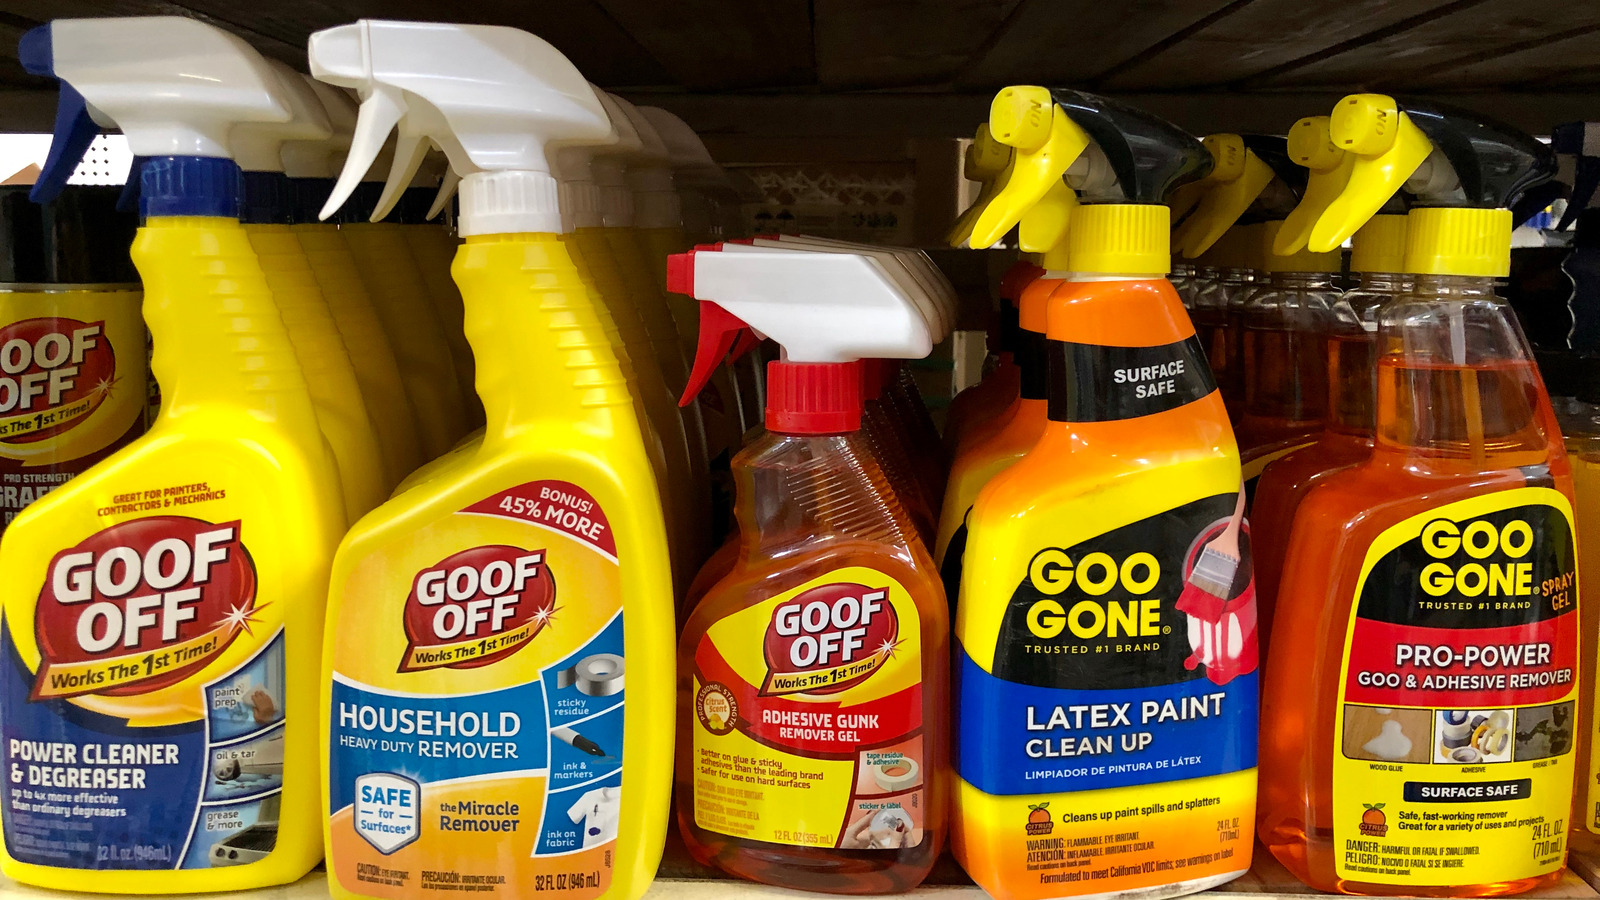 Goof Off Vs Goo Gone: Battle of the Stain Busters!